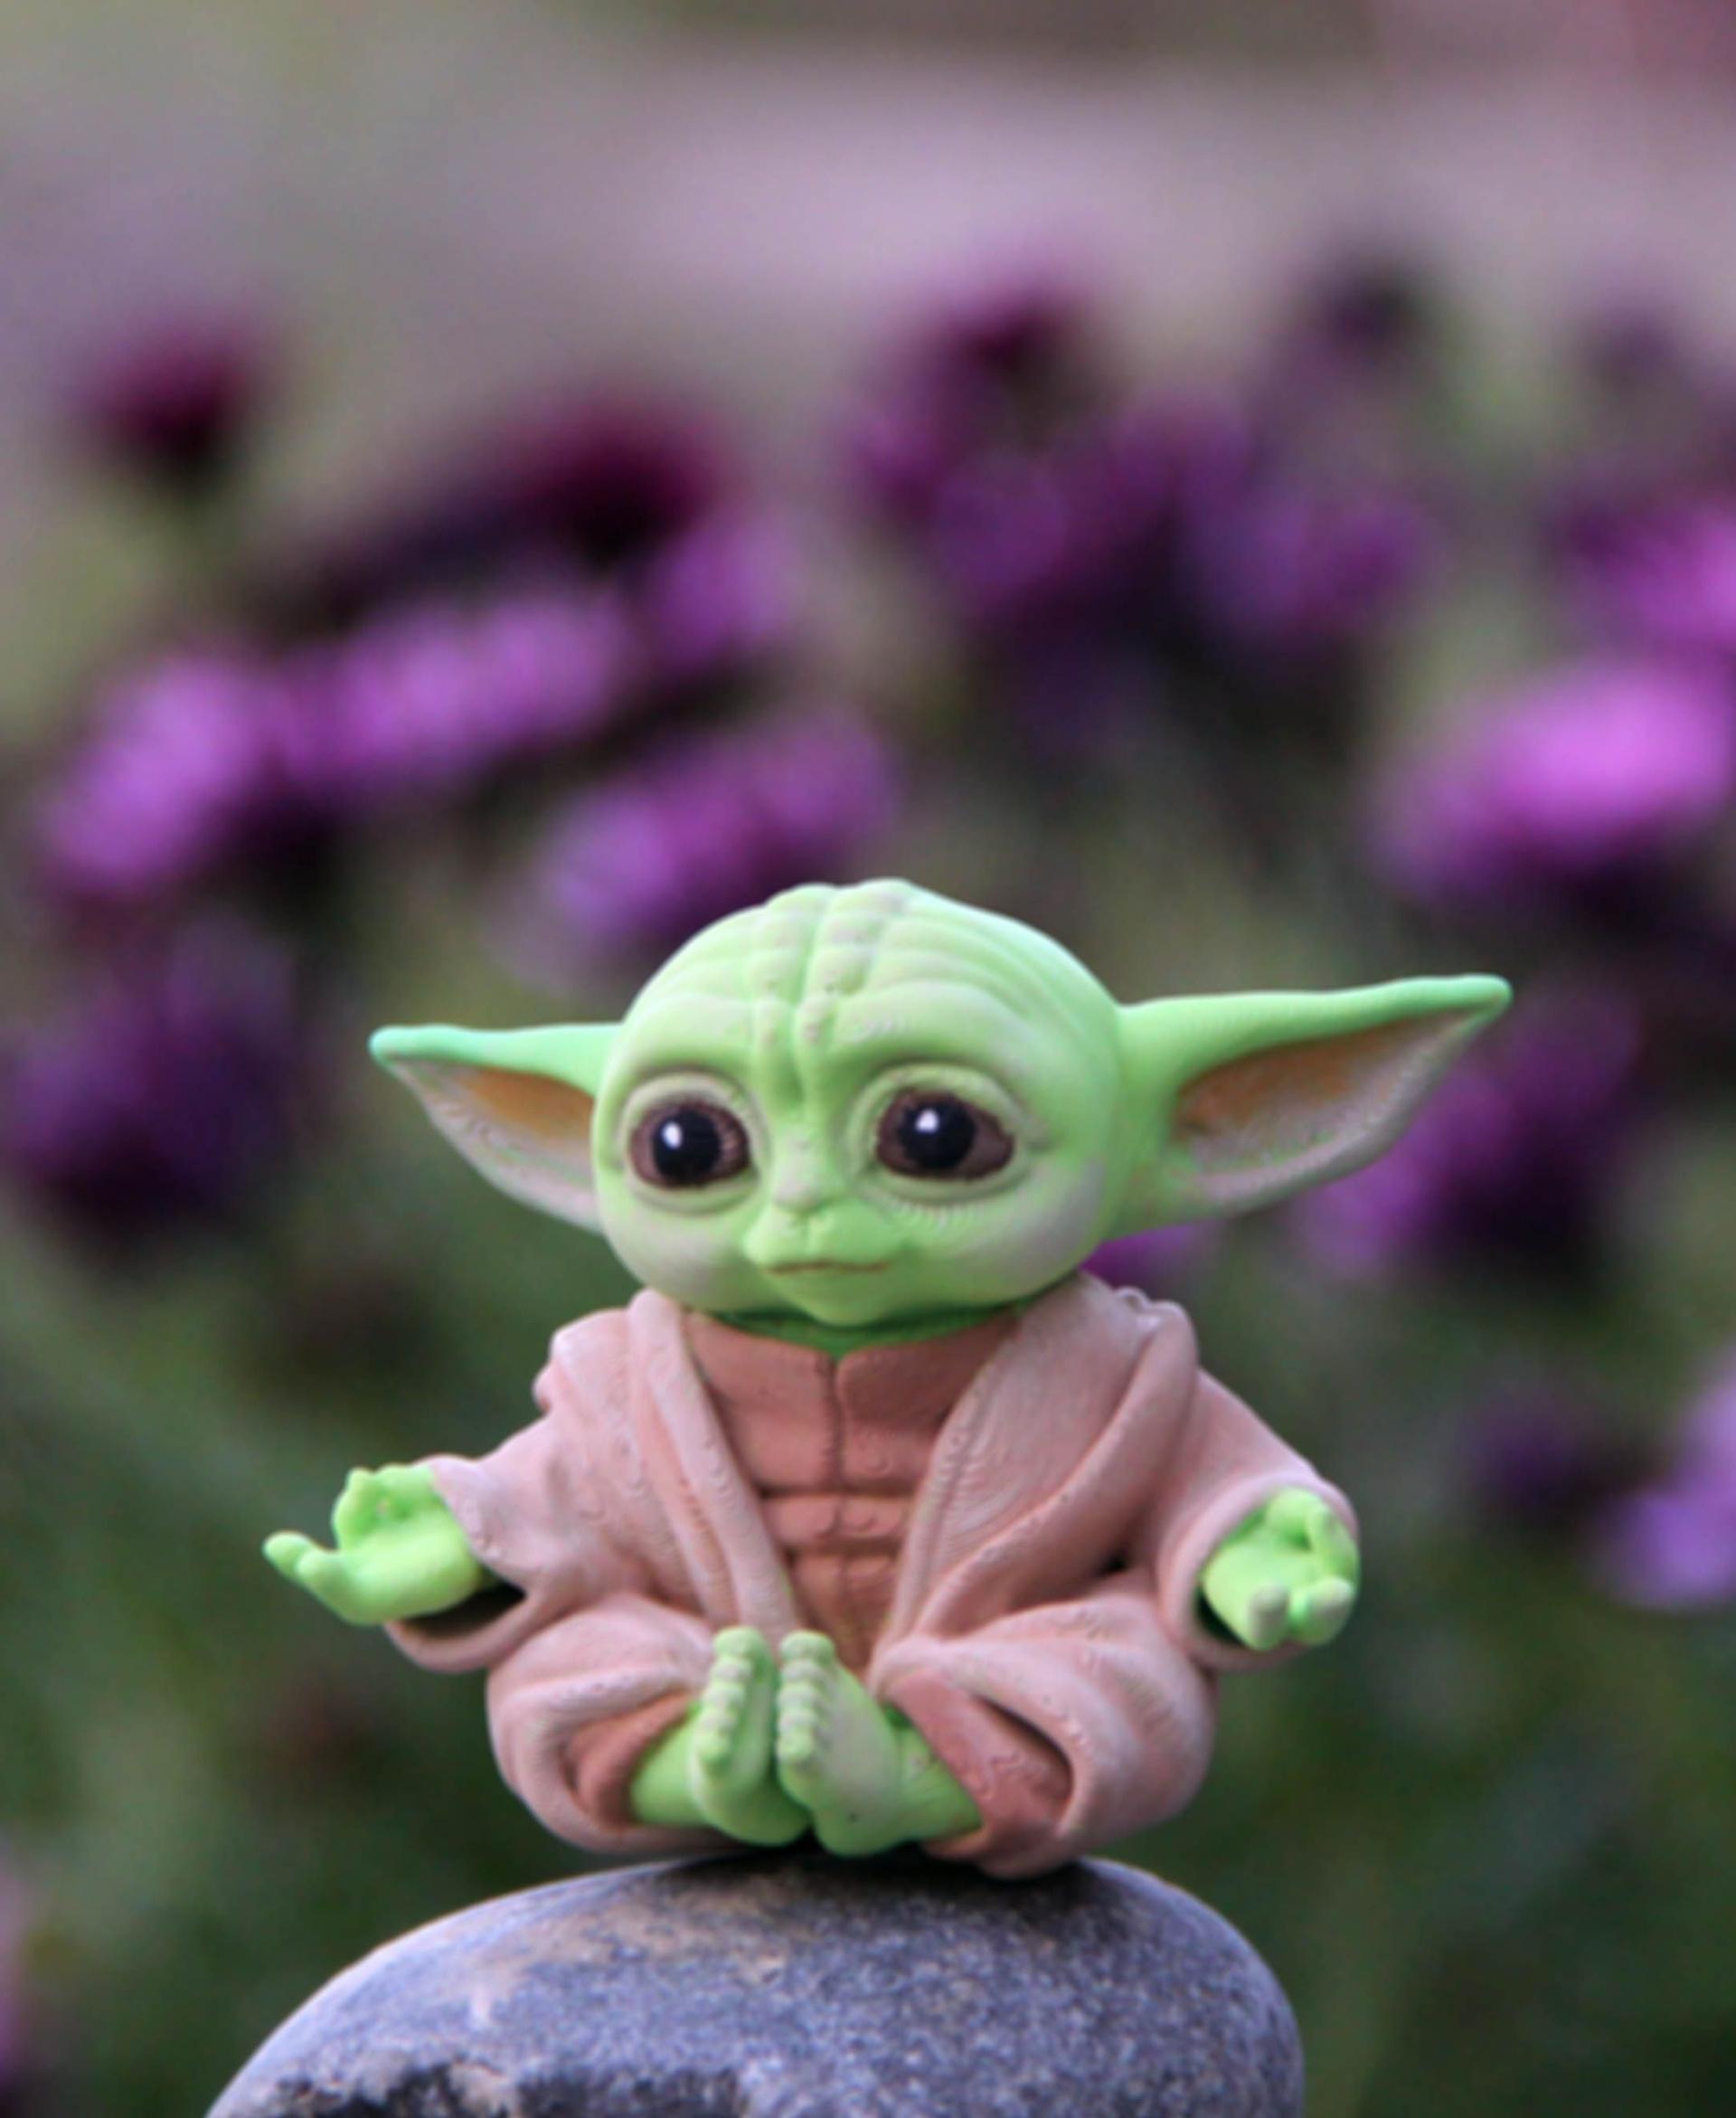 Baby Yoda  - Printed in Polymaker gradient summer. Nice supports only on back of model if printed the way it automatically loads into slicer. - 3d model